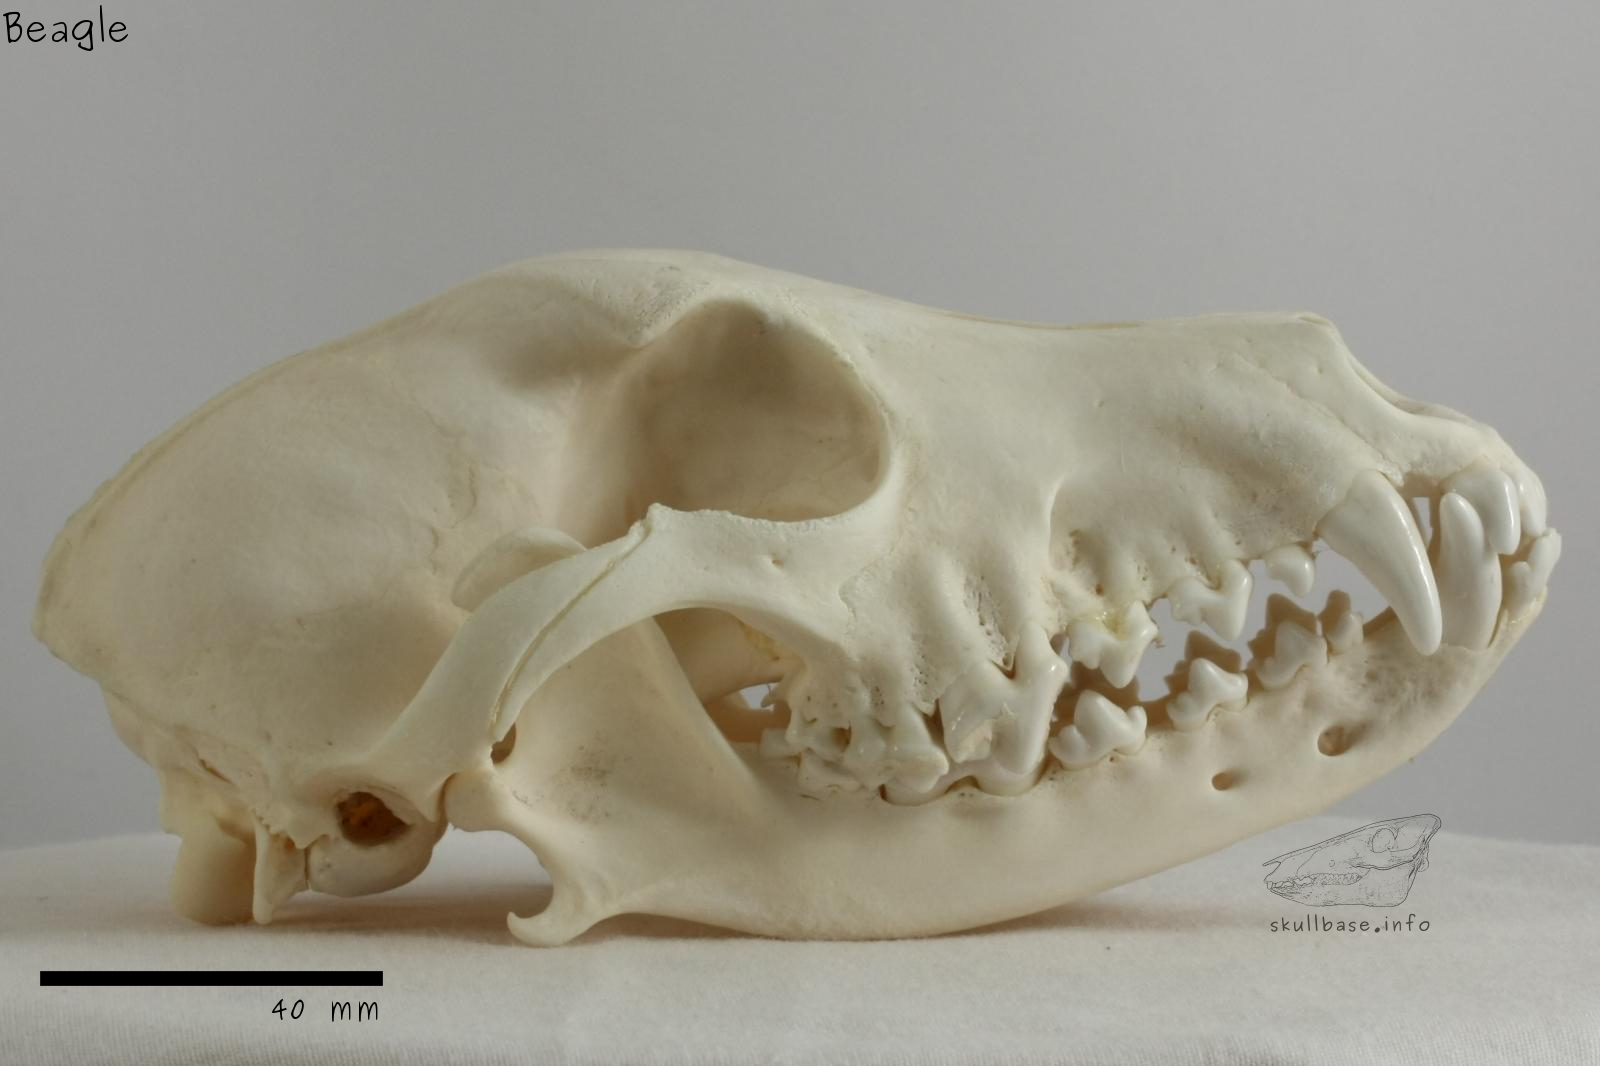 Beagle (Canis lupus familiaris) skull lateral view